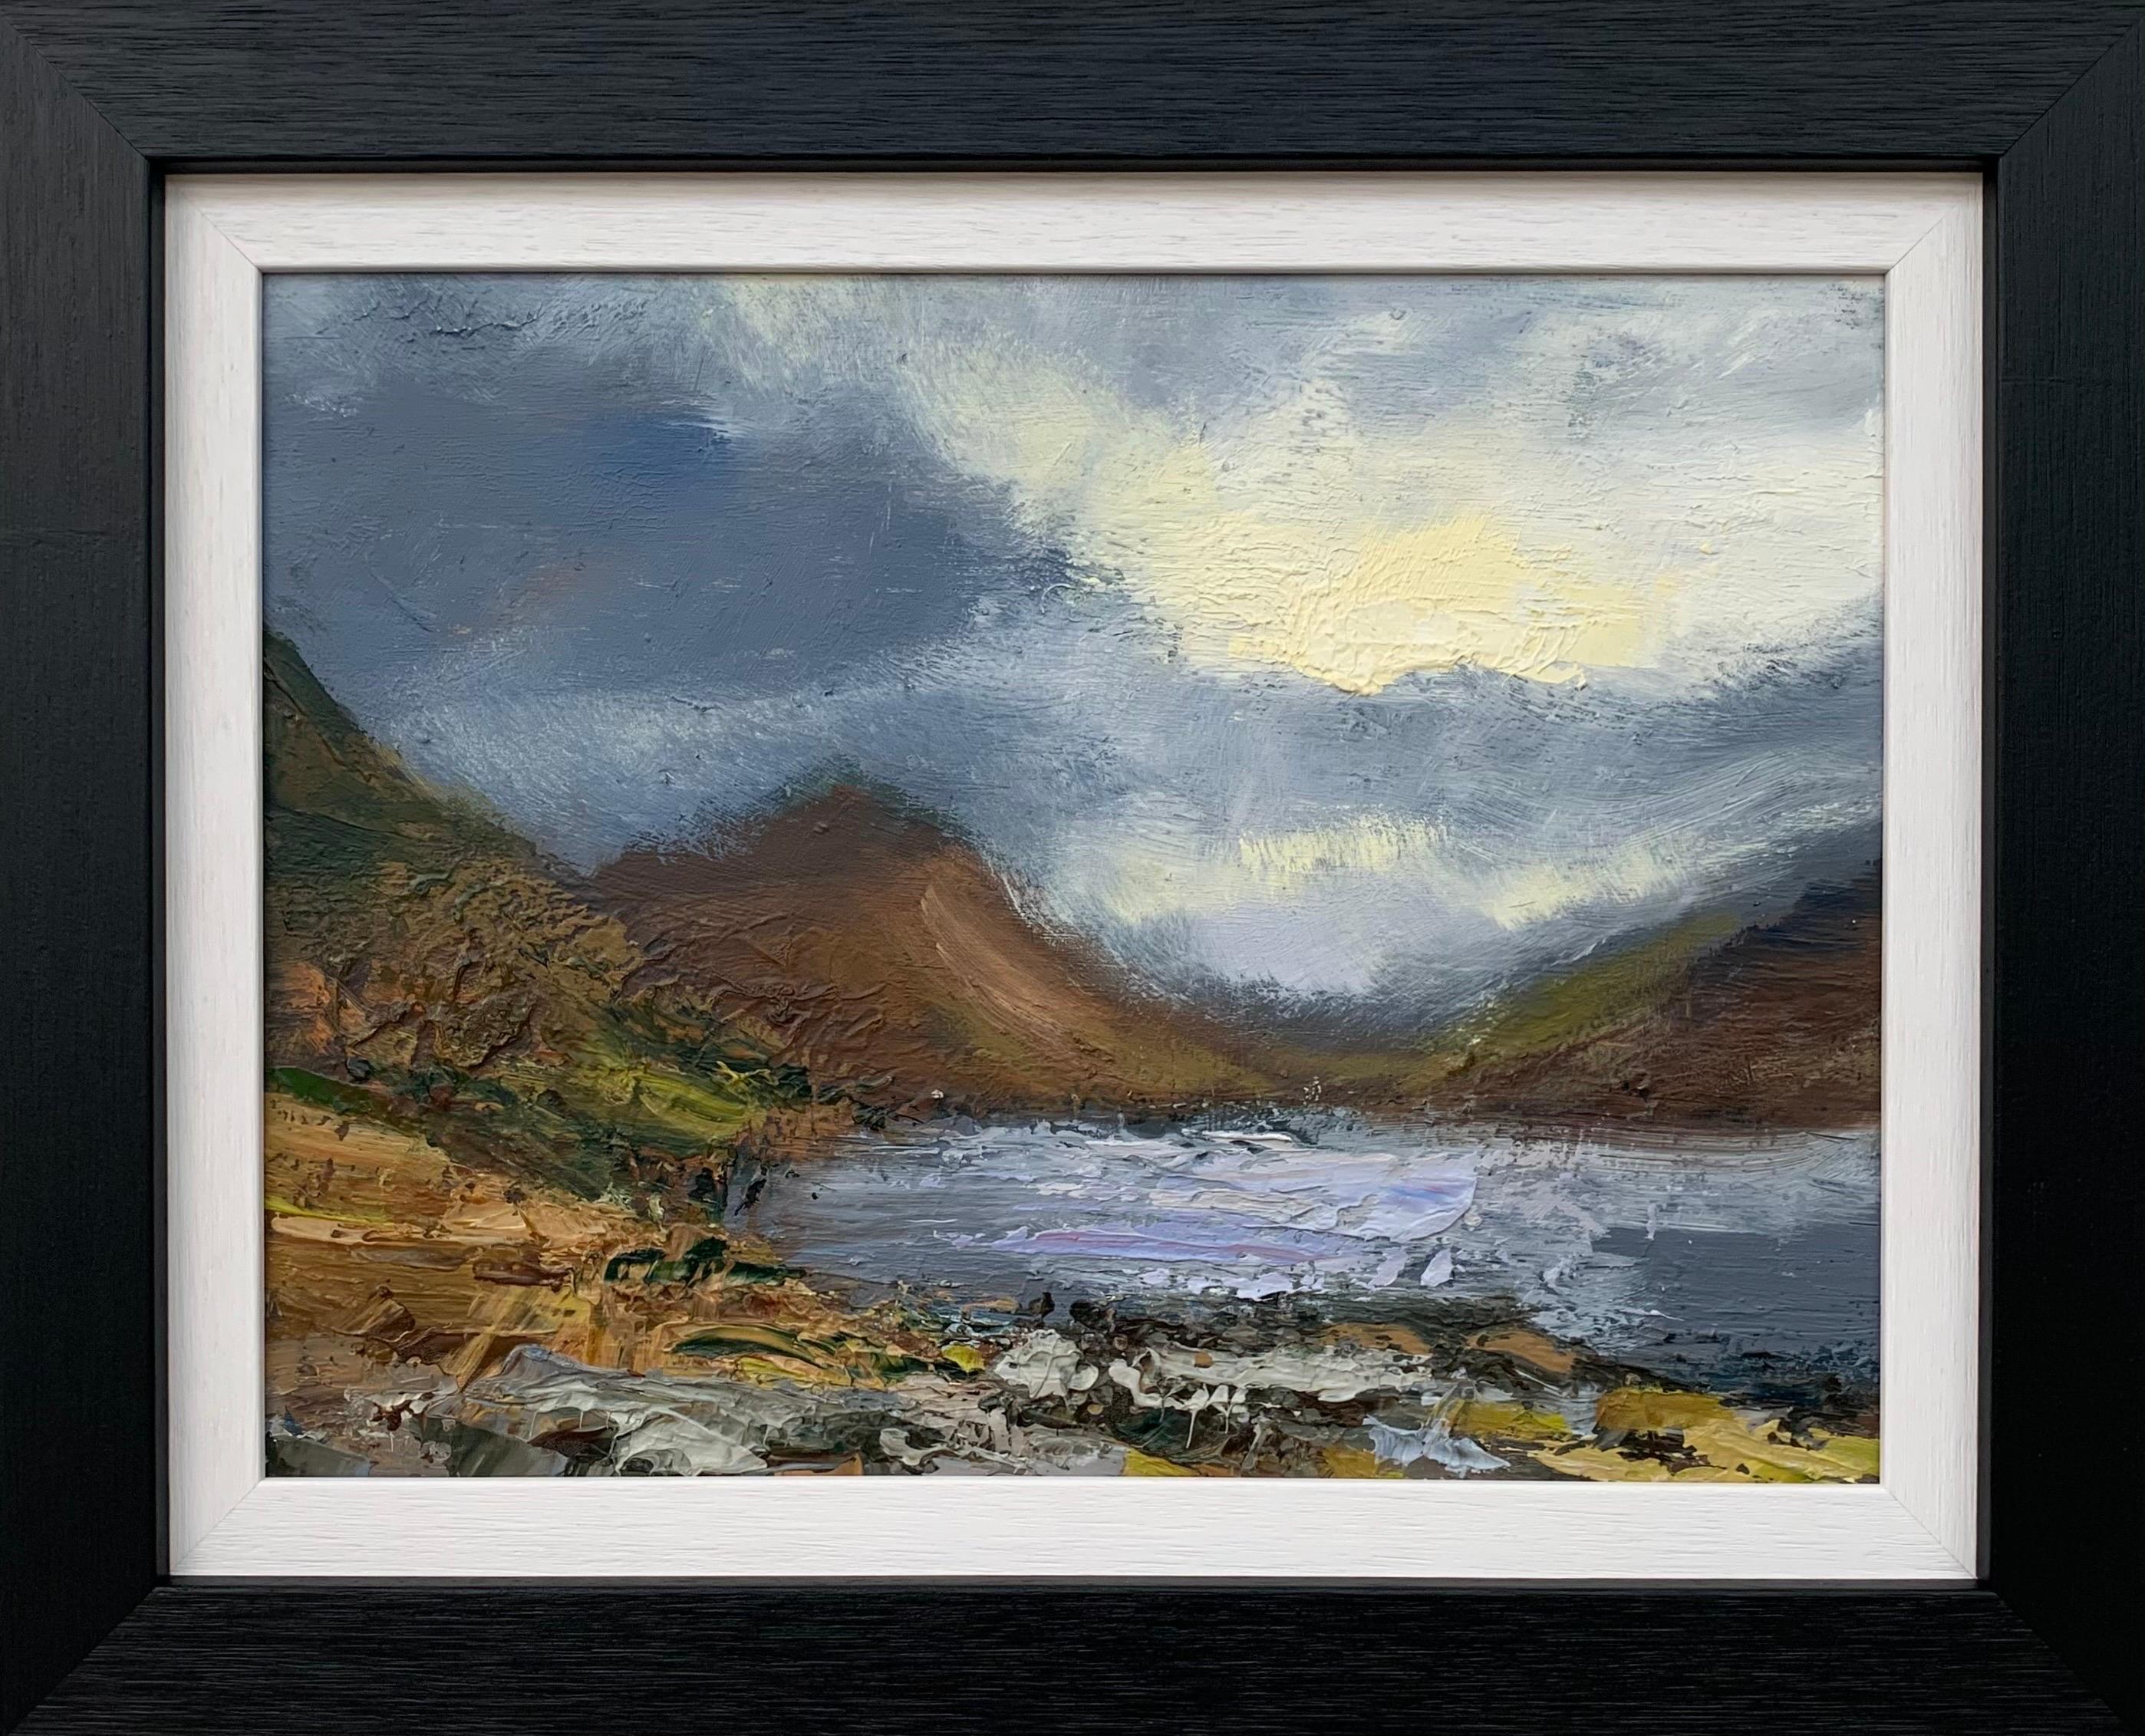 Colin Halliday Landscape Painting - Impasto Oil Painting of the English Lake District by British Landscape Artist